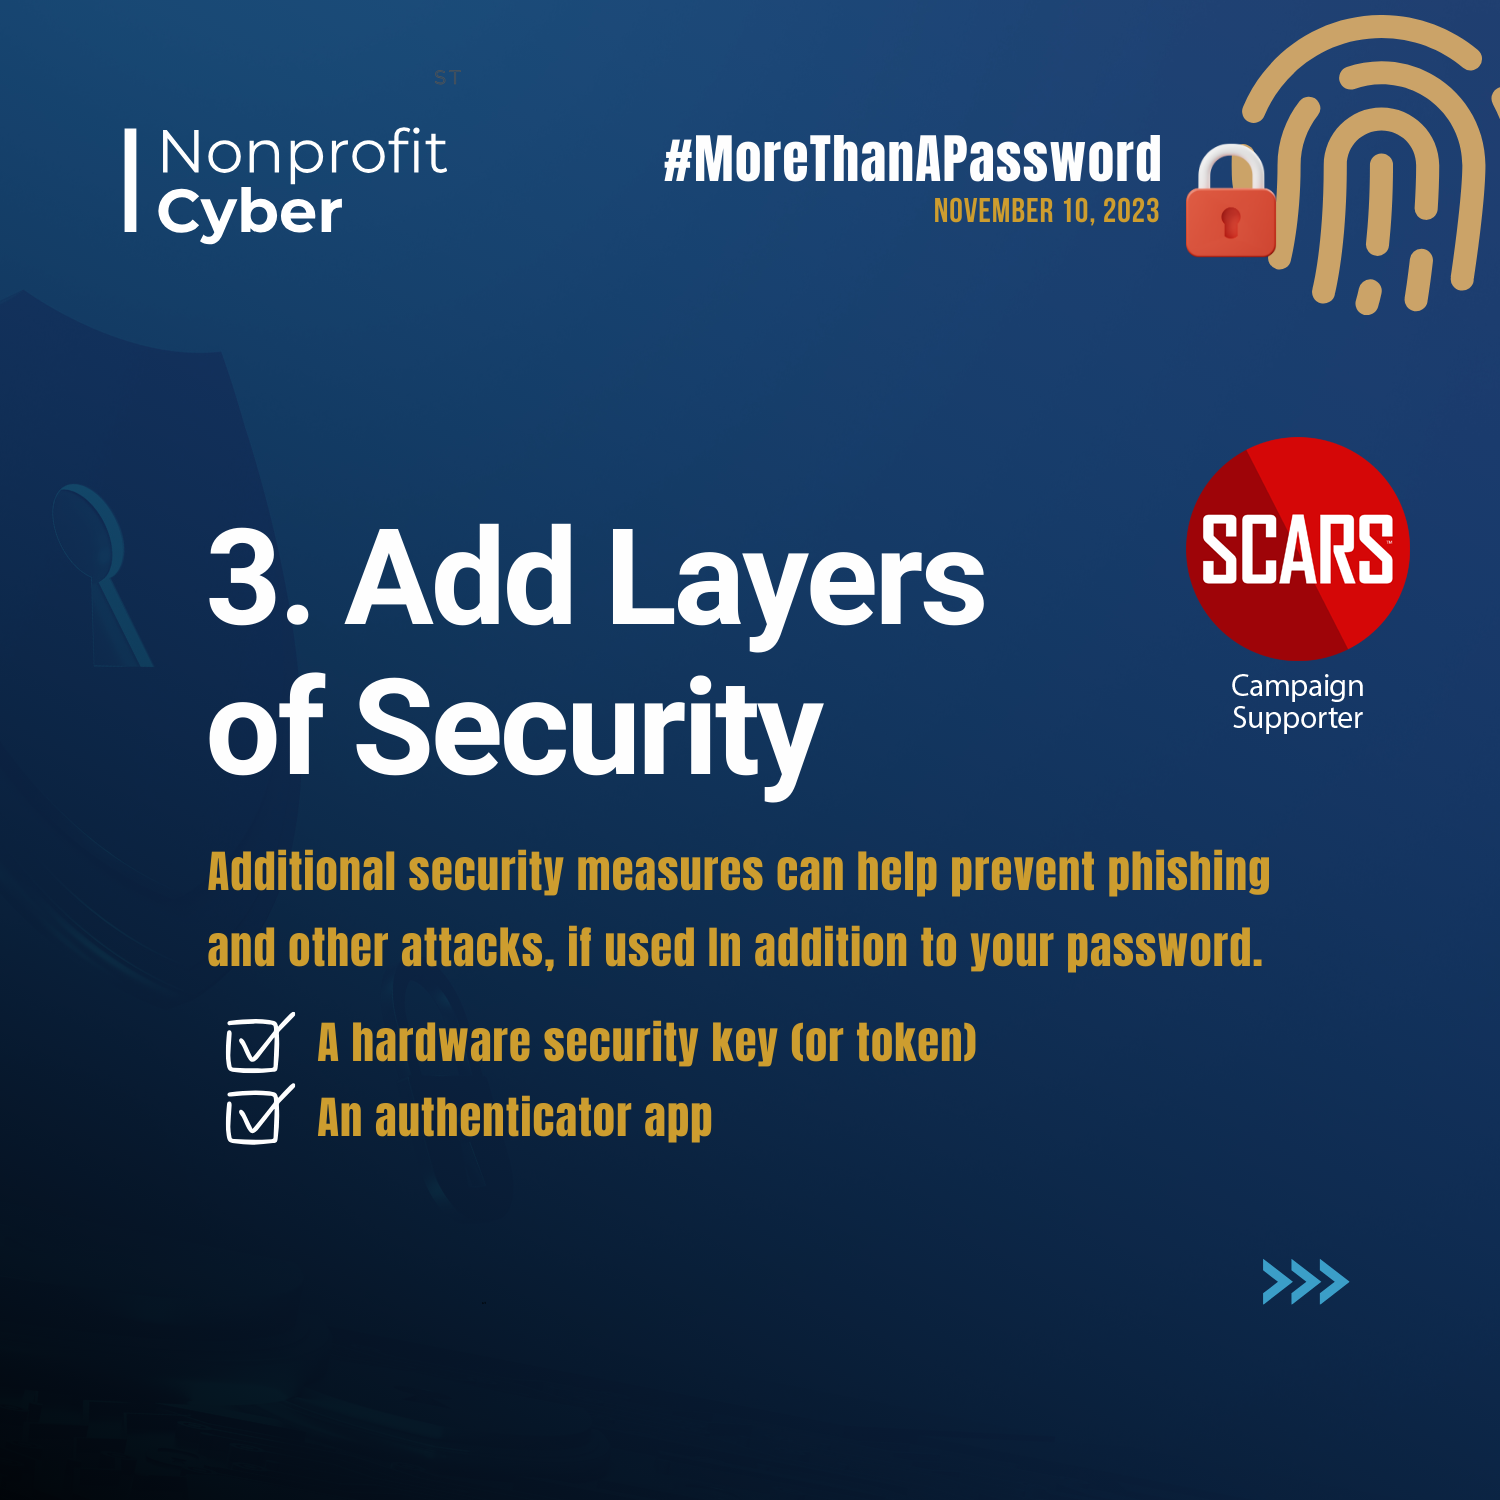 Common Guidance on Passwords